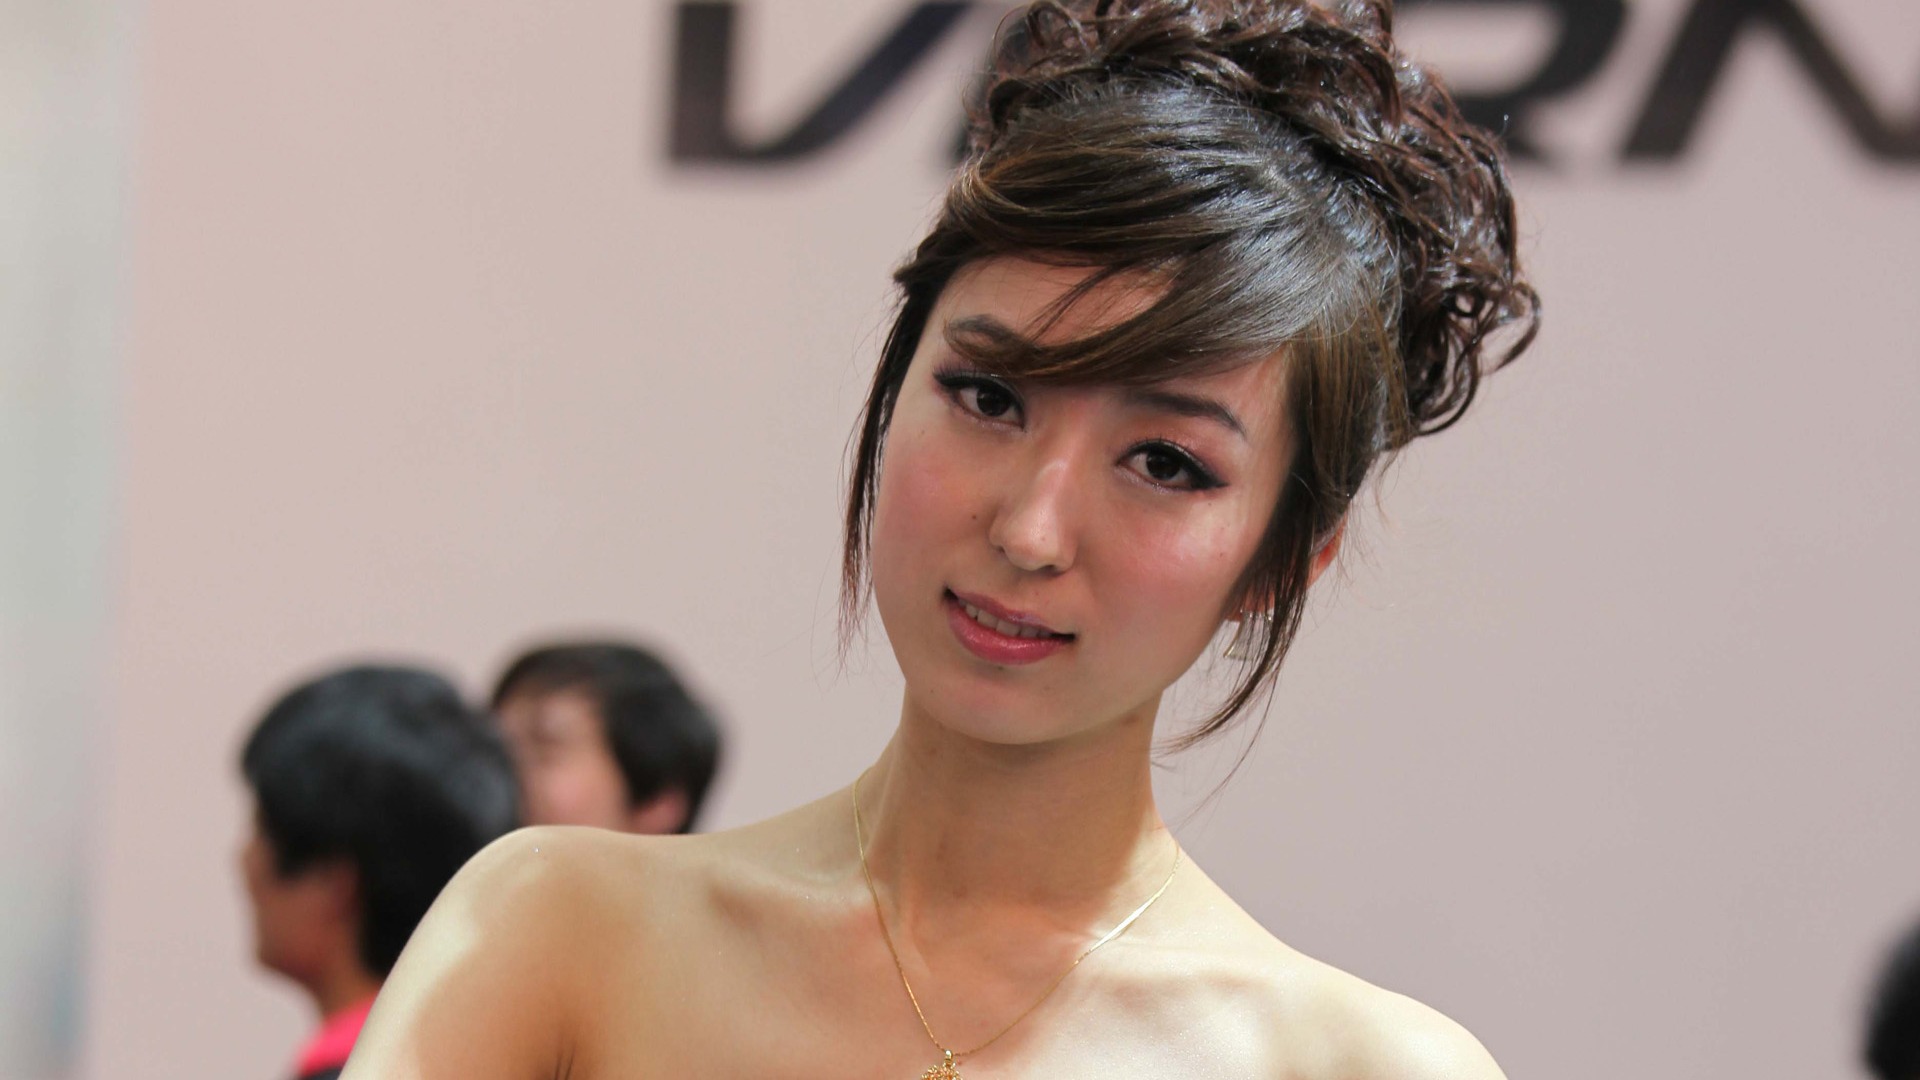 2010 Beijing International Auto Show beauty (2) (the wind chasing the clouds works) #20 - 1920x1080